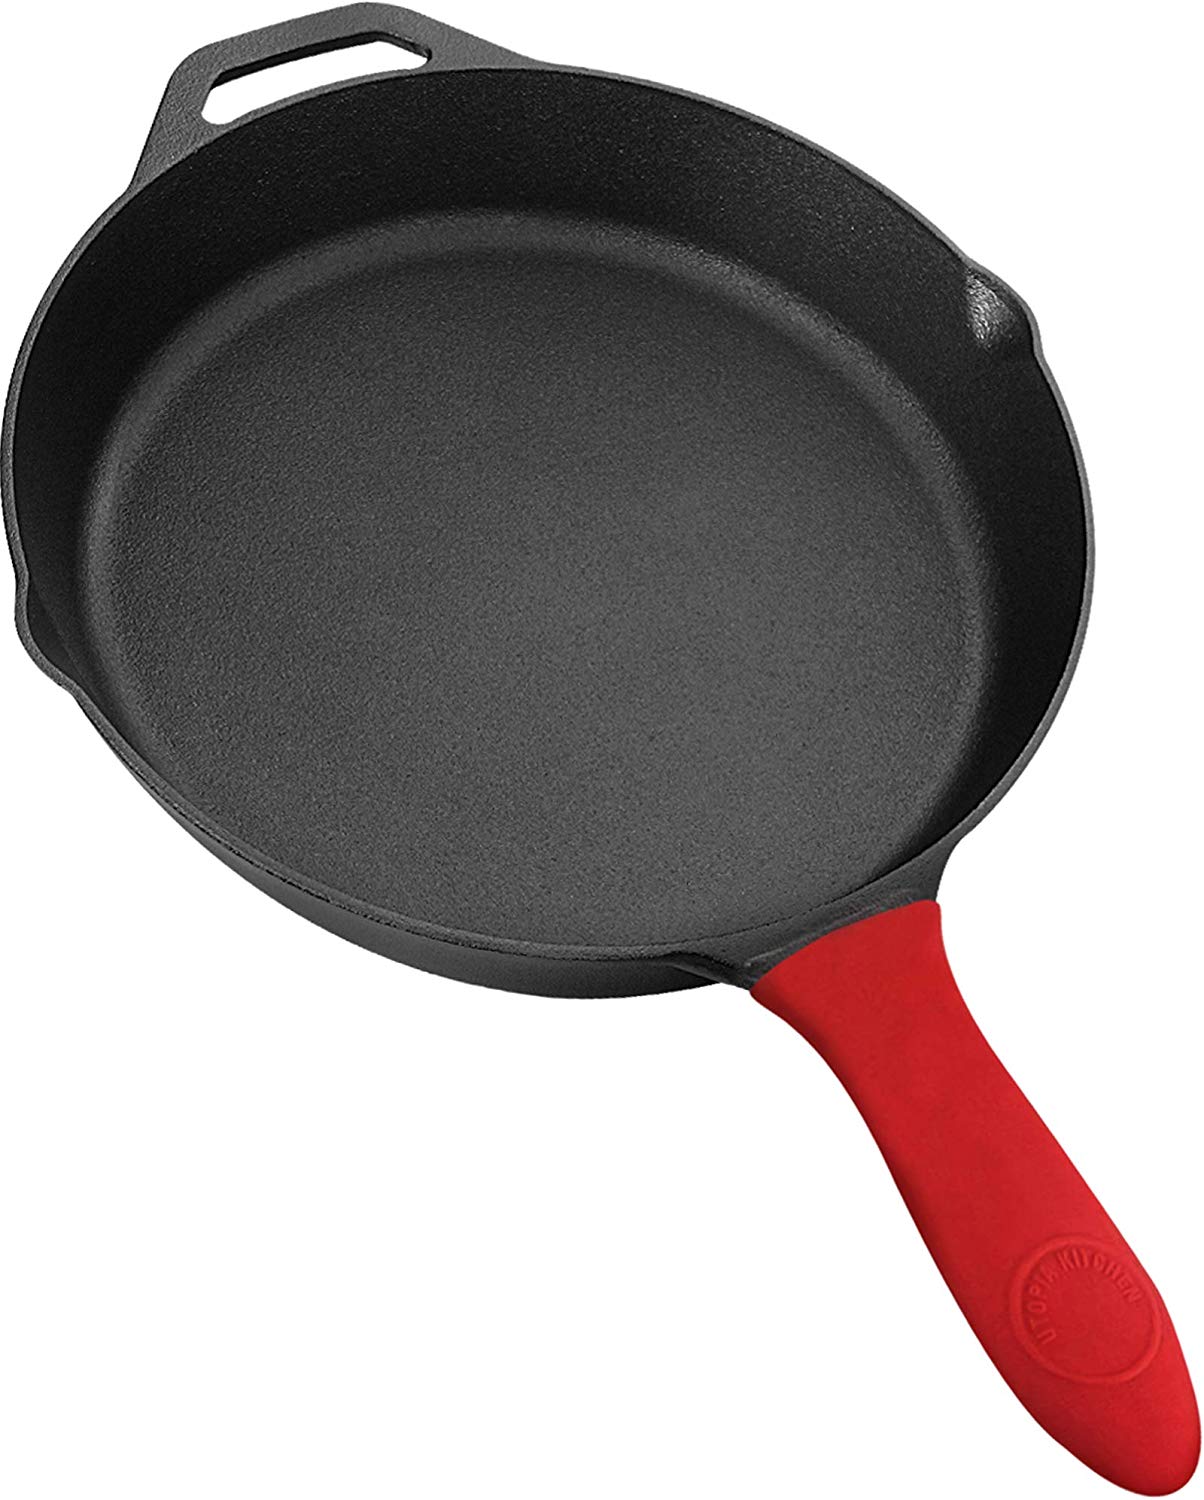 Lodge 12 Inch Cast Iron Skillet. Pre-Seasoned Cast Iron Skillet with Red  Silicone Hot Handle Holder.